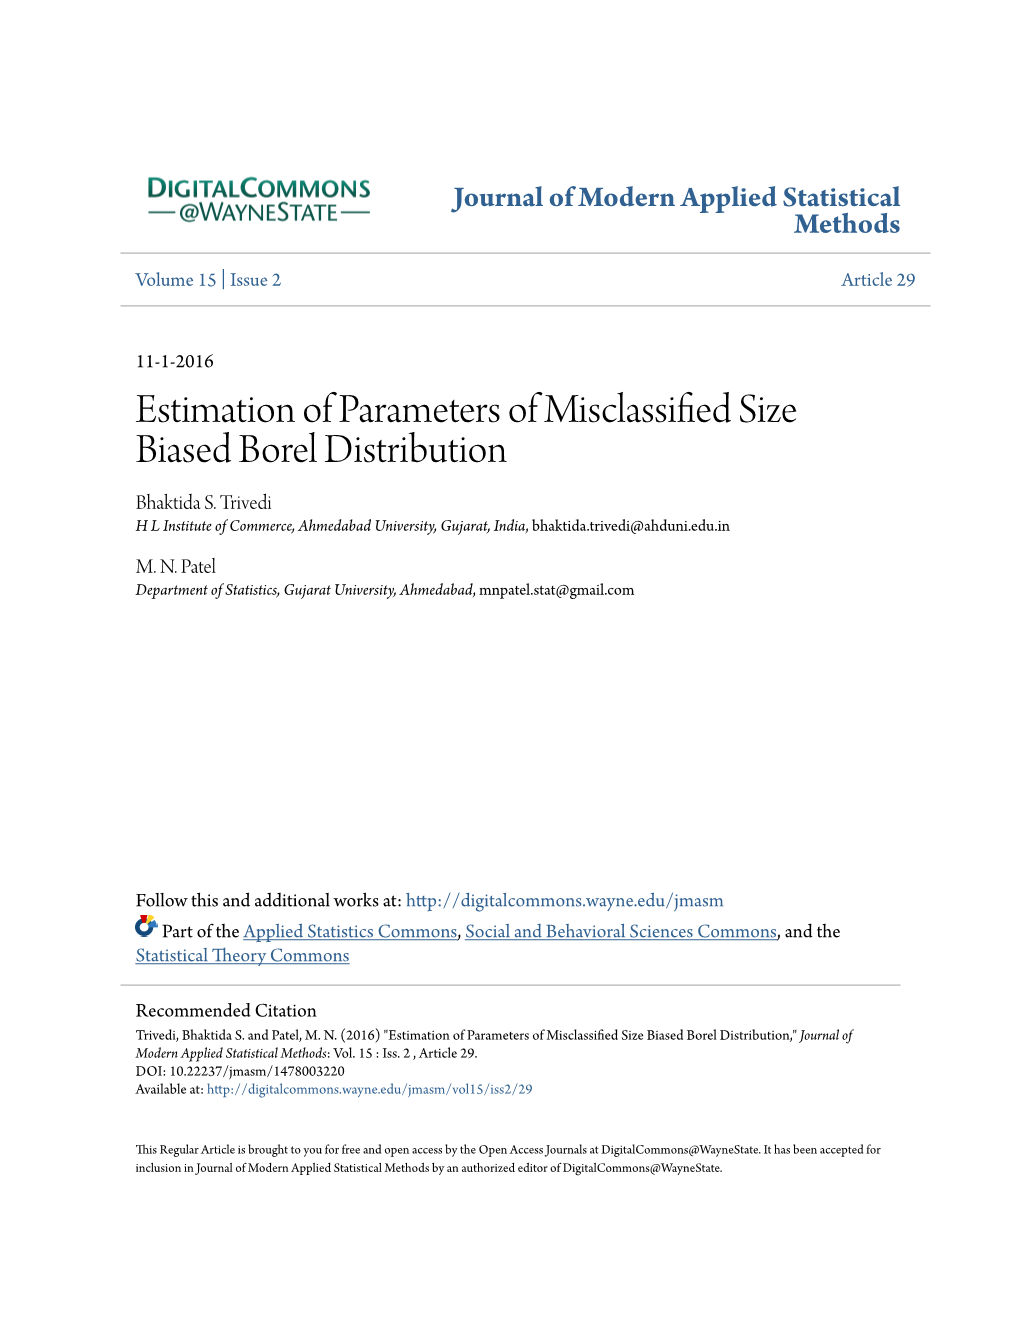 Estimation of Parameters of Misclassified Size Biased Borel Distribution," Journal of Modern Applied Statistical Methods: Vol